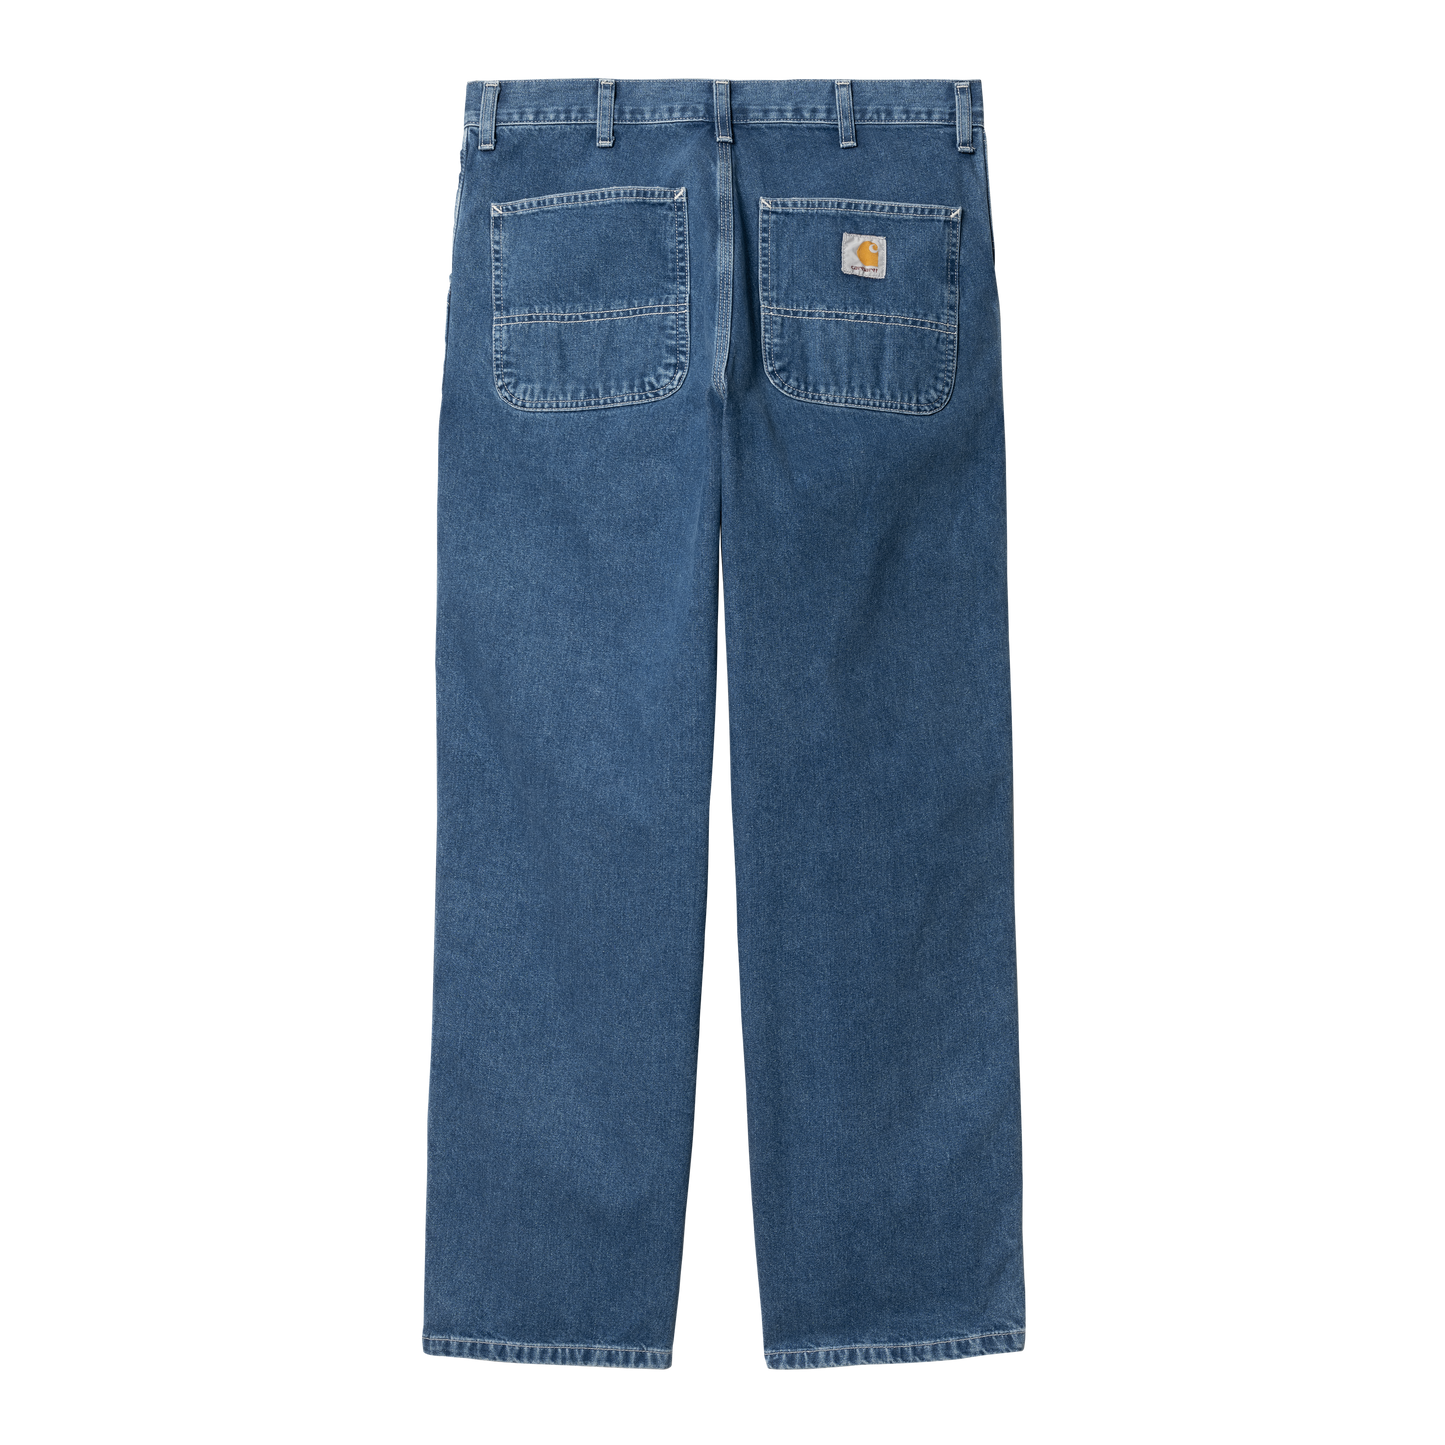 Simple Pant - Blue (Stone Washed)